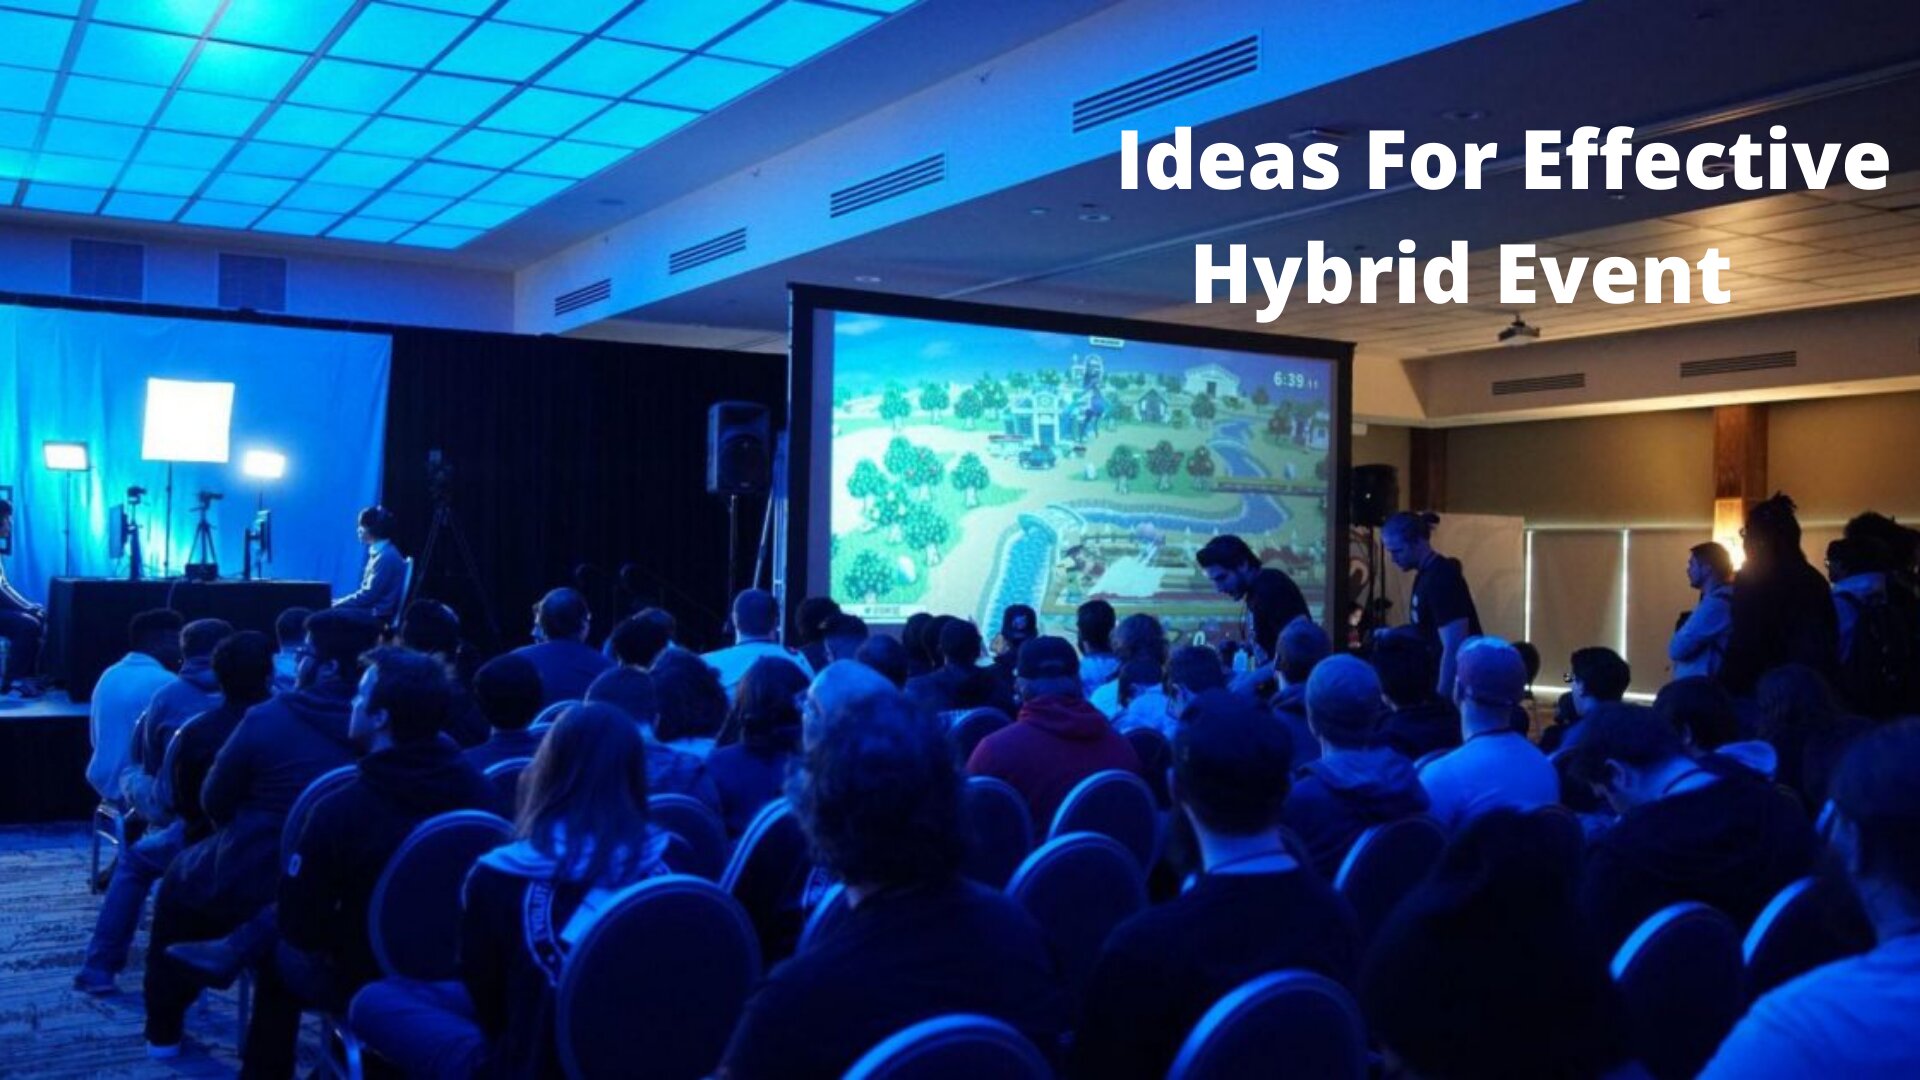 7 Ideas For Effective Hybrid Event